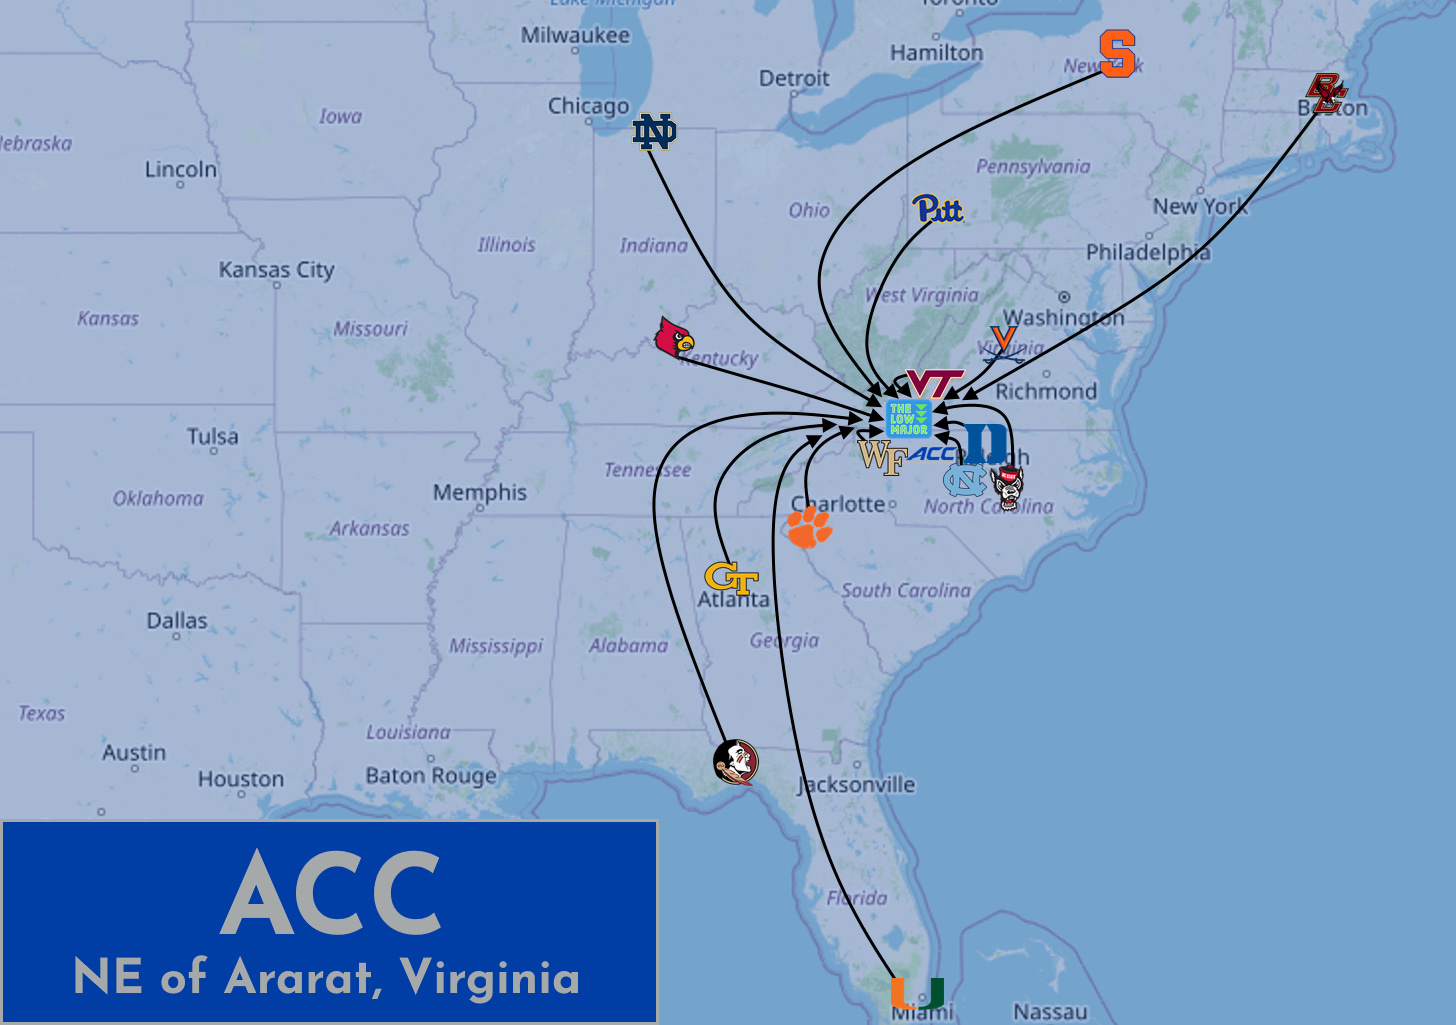 ACC midpoint map